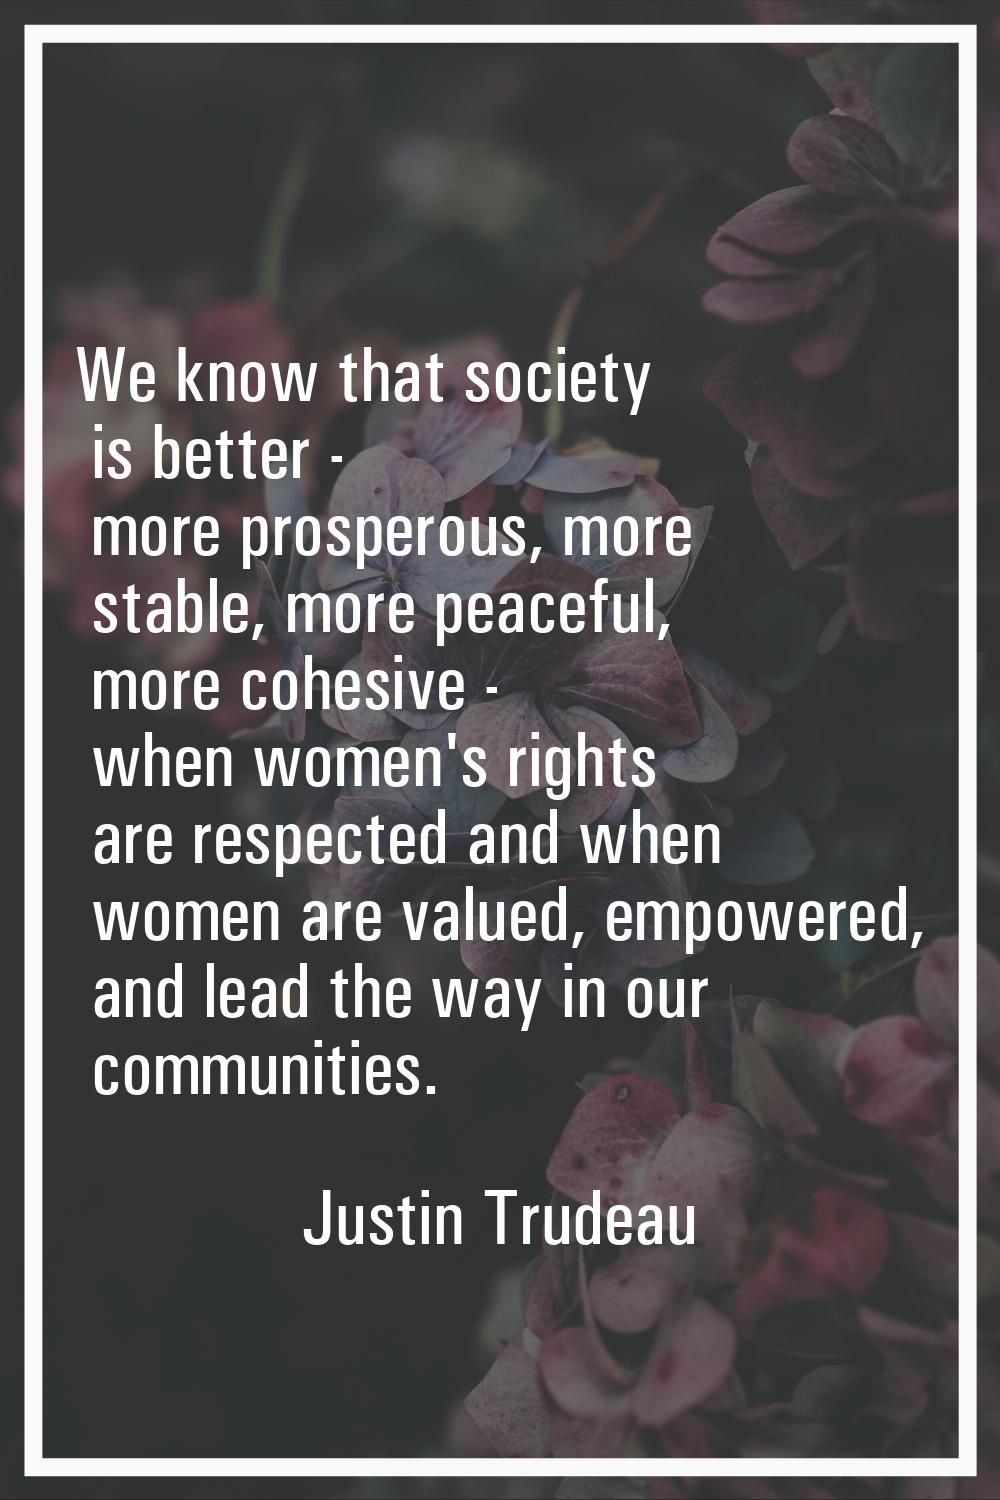 We know that society is better - more prosperous, more stable, more peaceful, more cohesive - when 